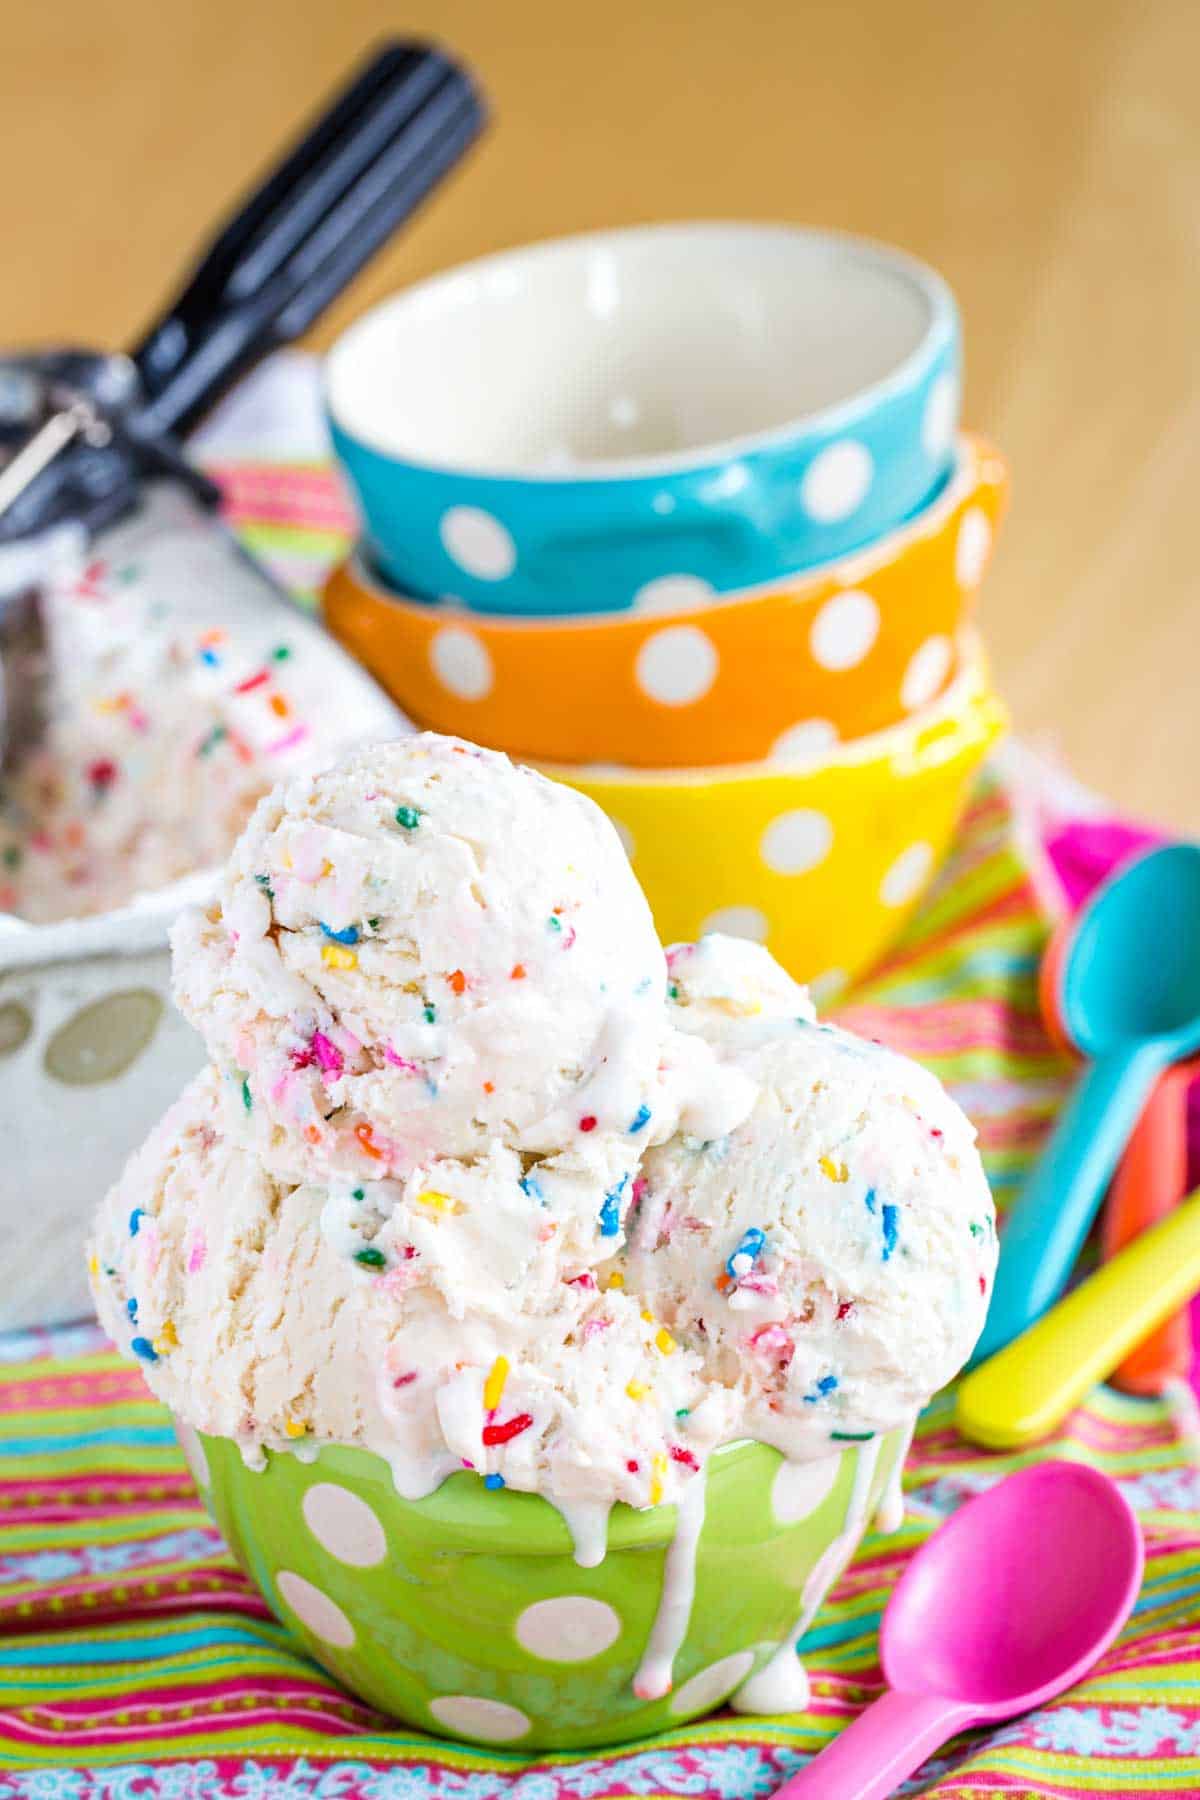 Cake Batter Ice Cream in a green polka dot bowl with a pink spoon next to it and more colorful bowls and spoons in the background.